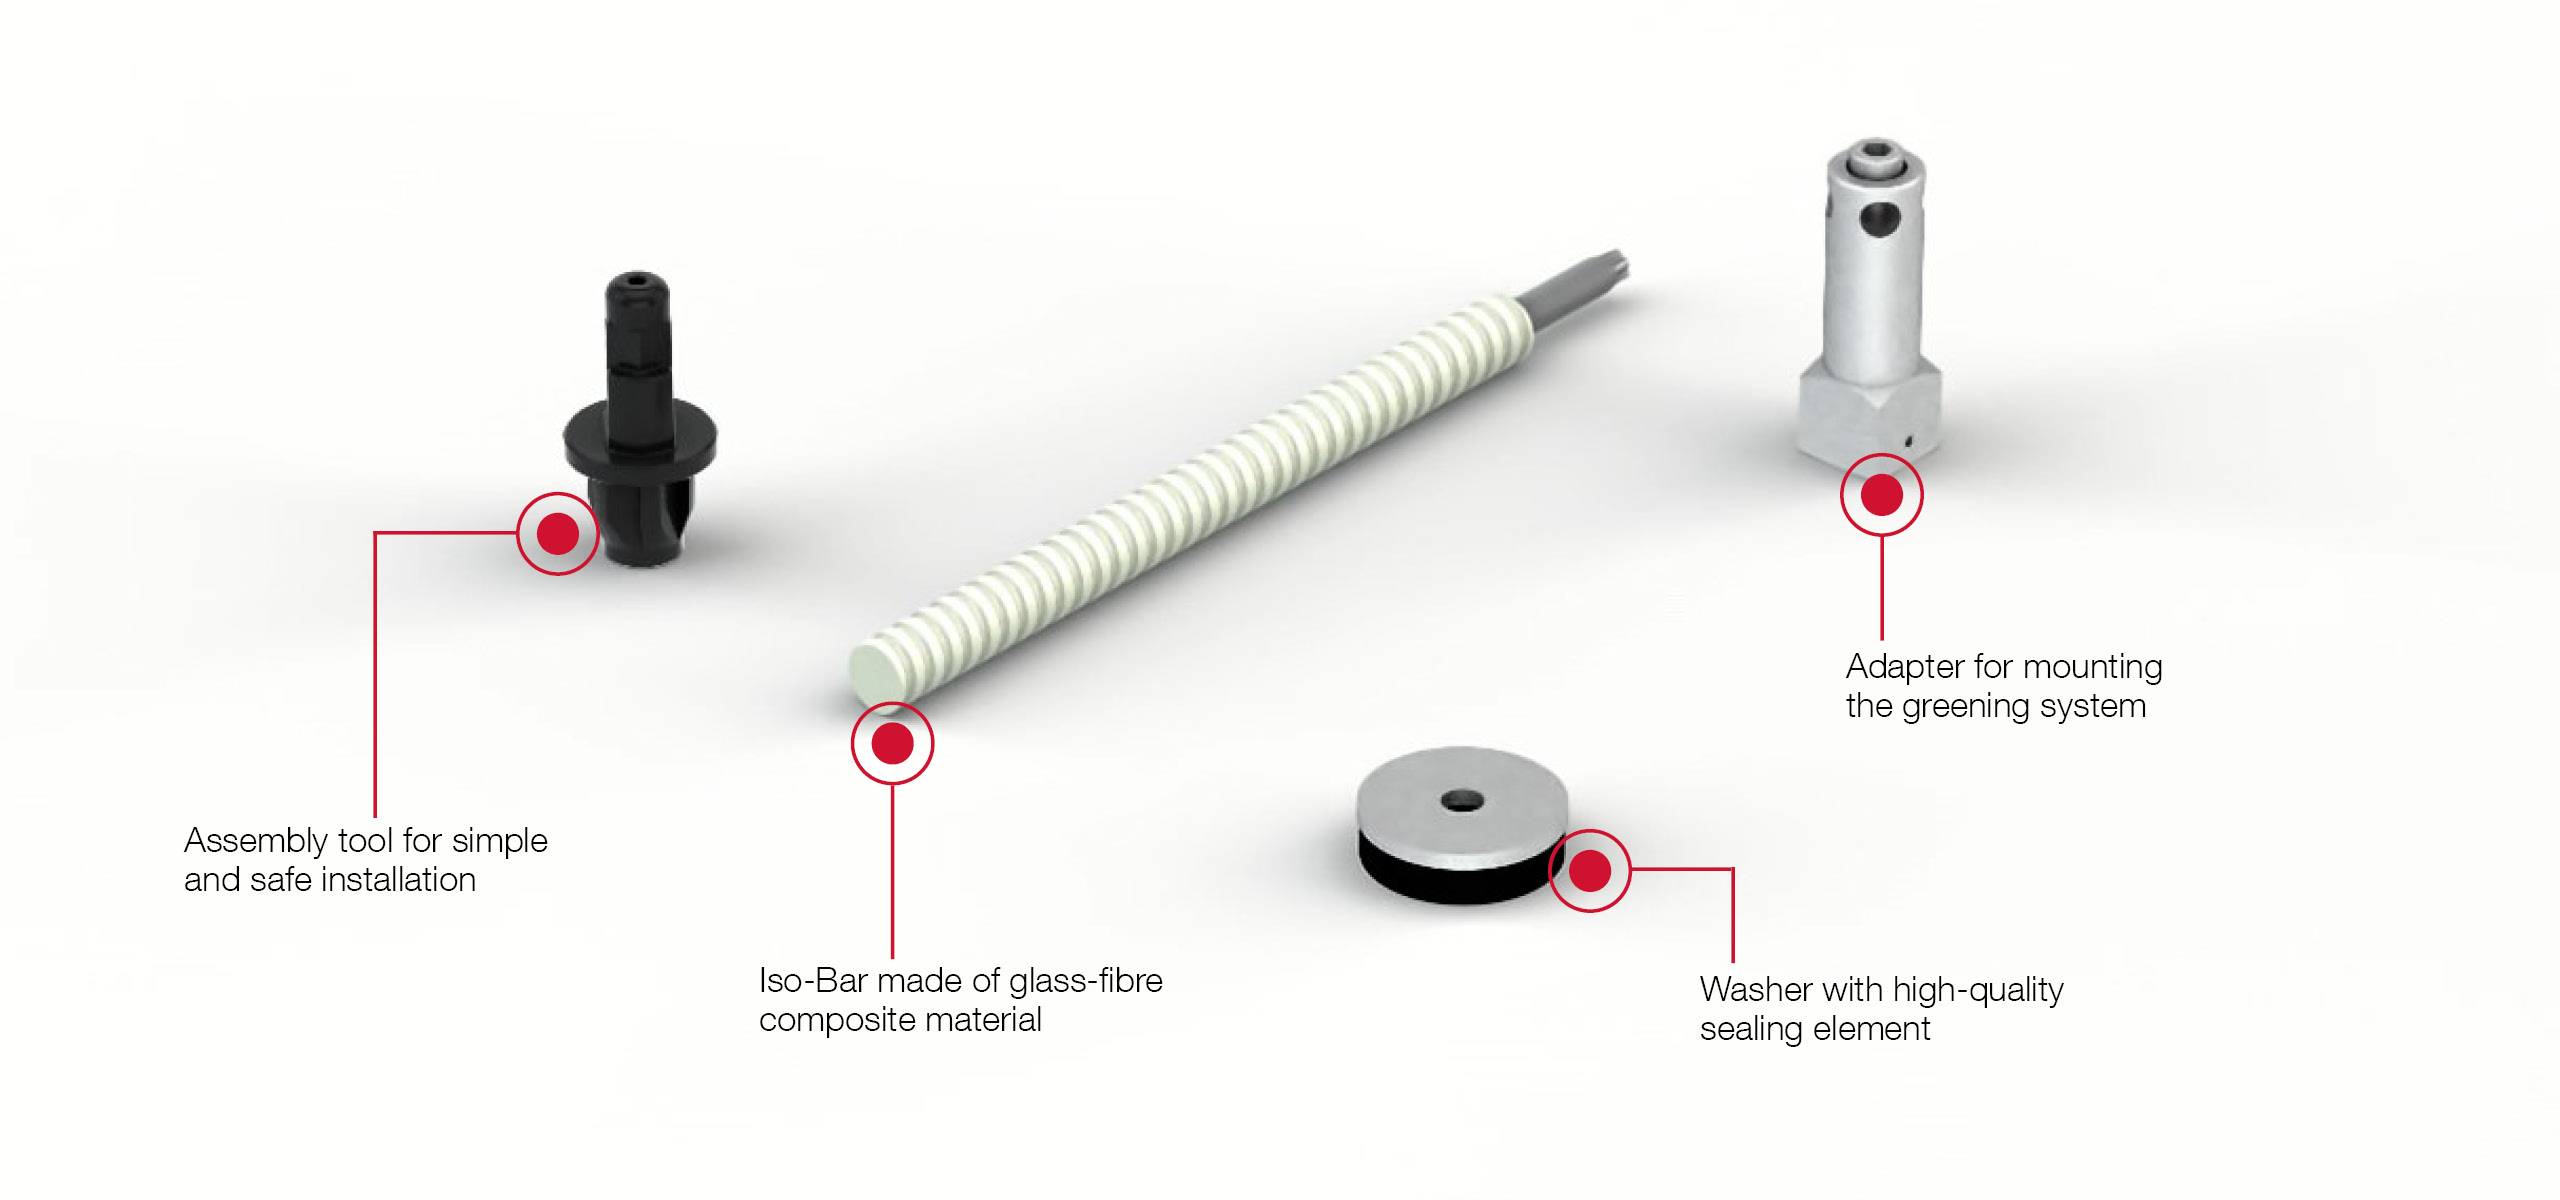 Iso-Bar ECO – Focus on the fastener